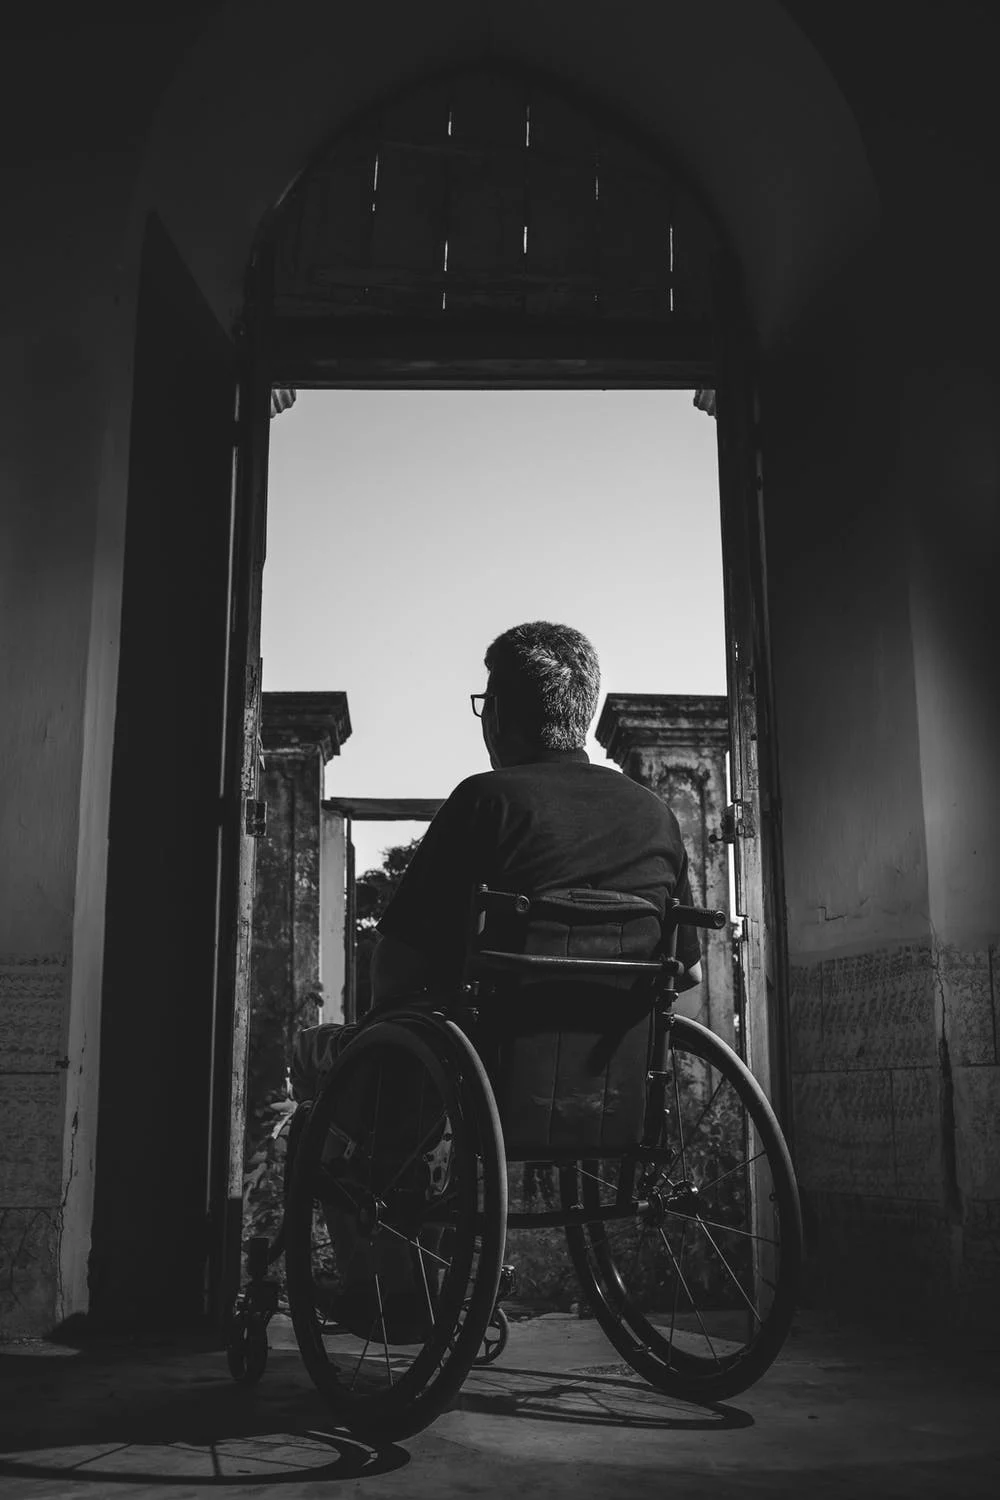 What Is a Disabled Service?